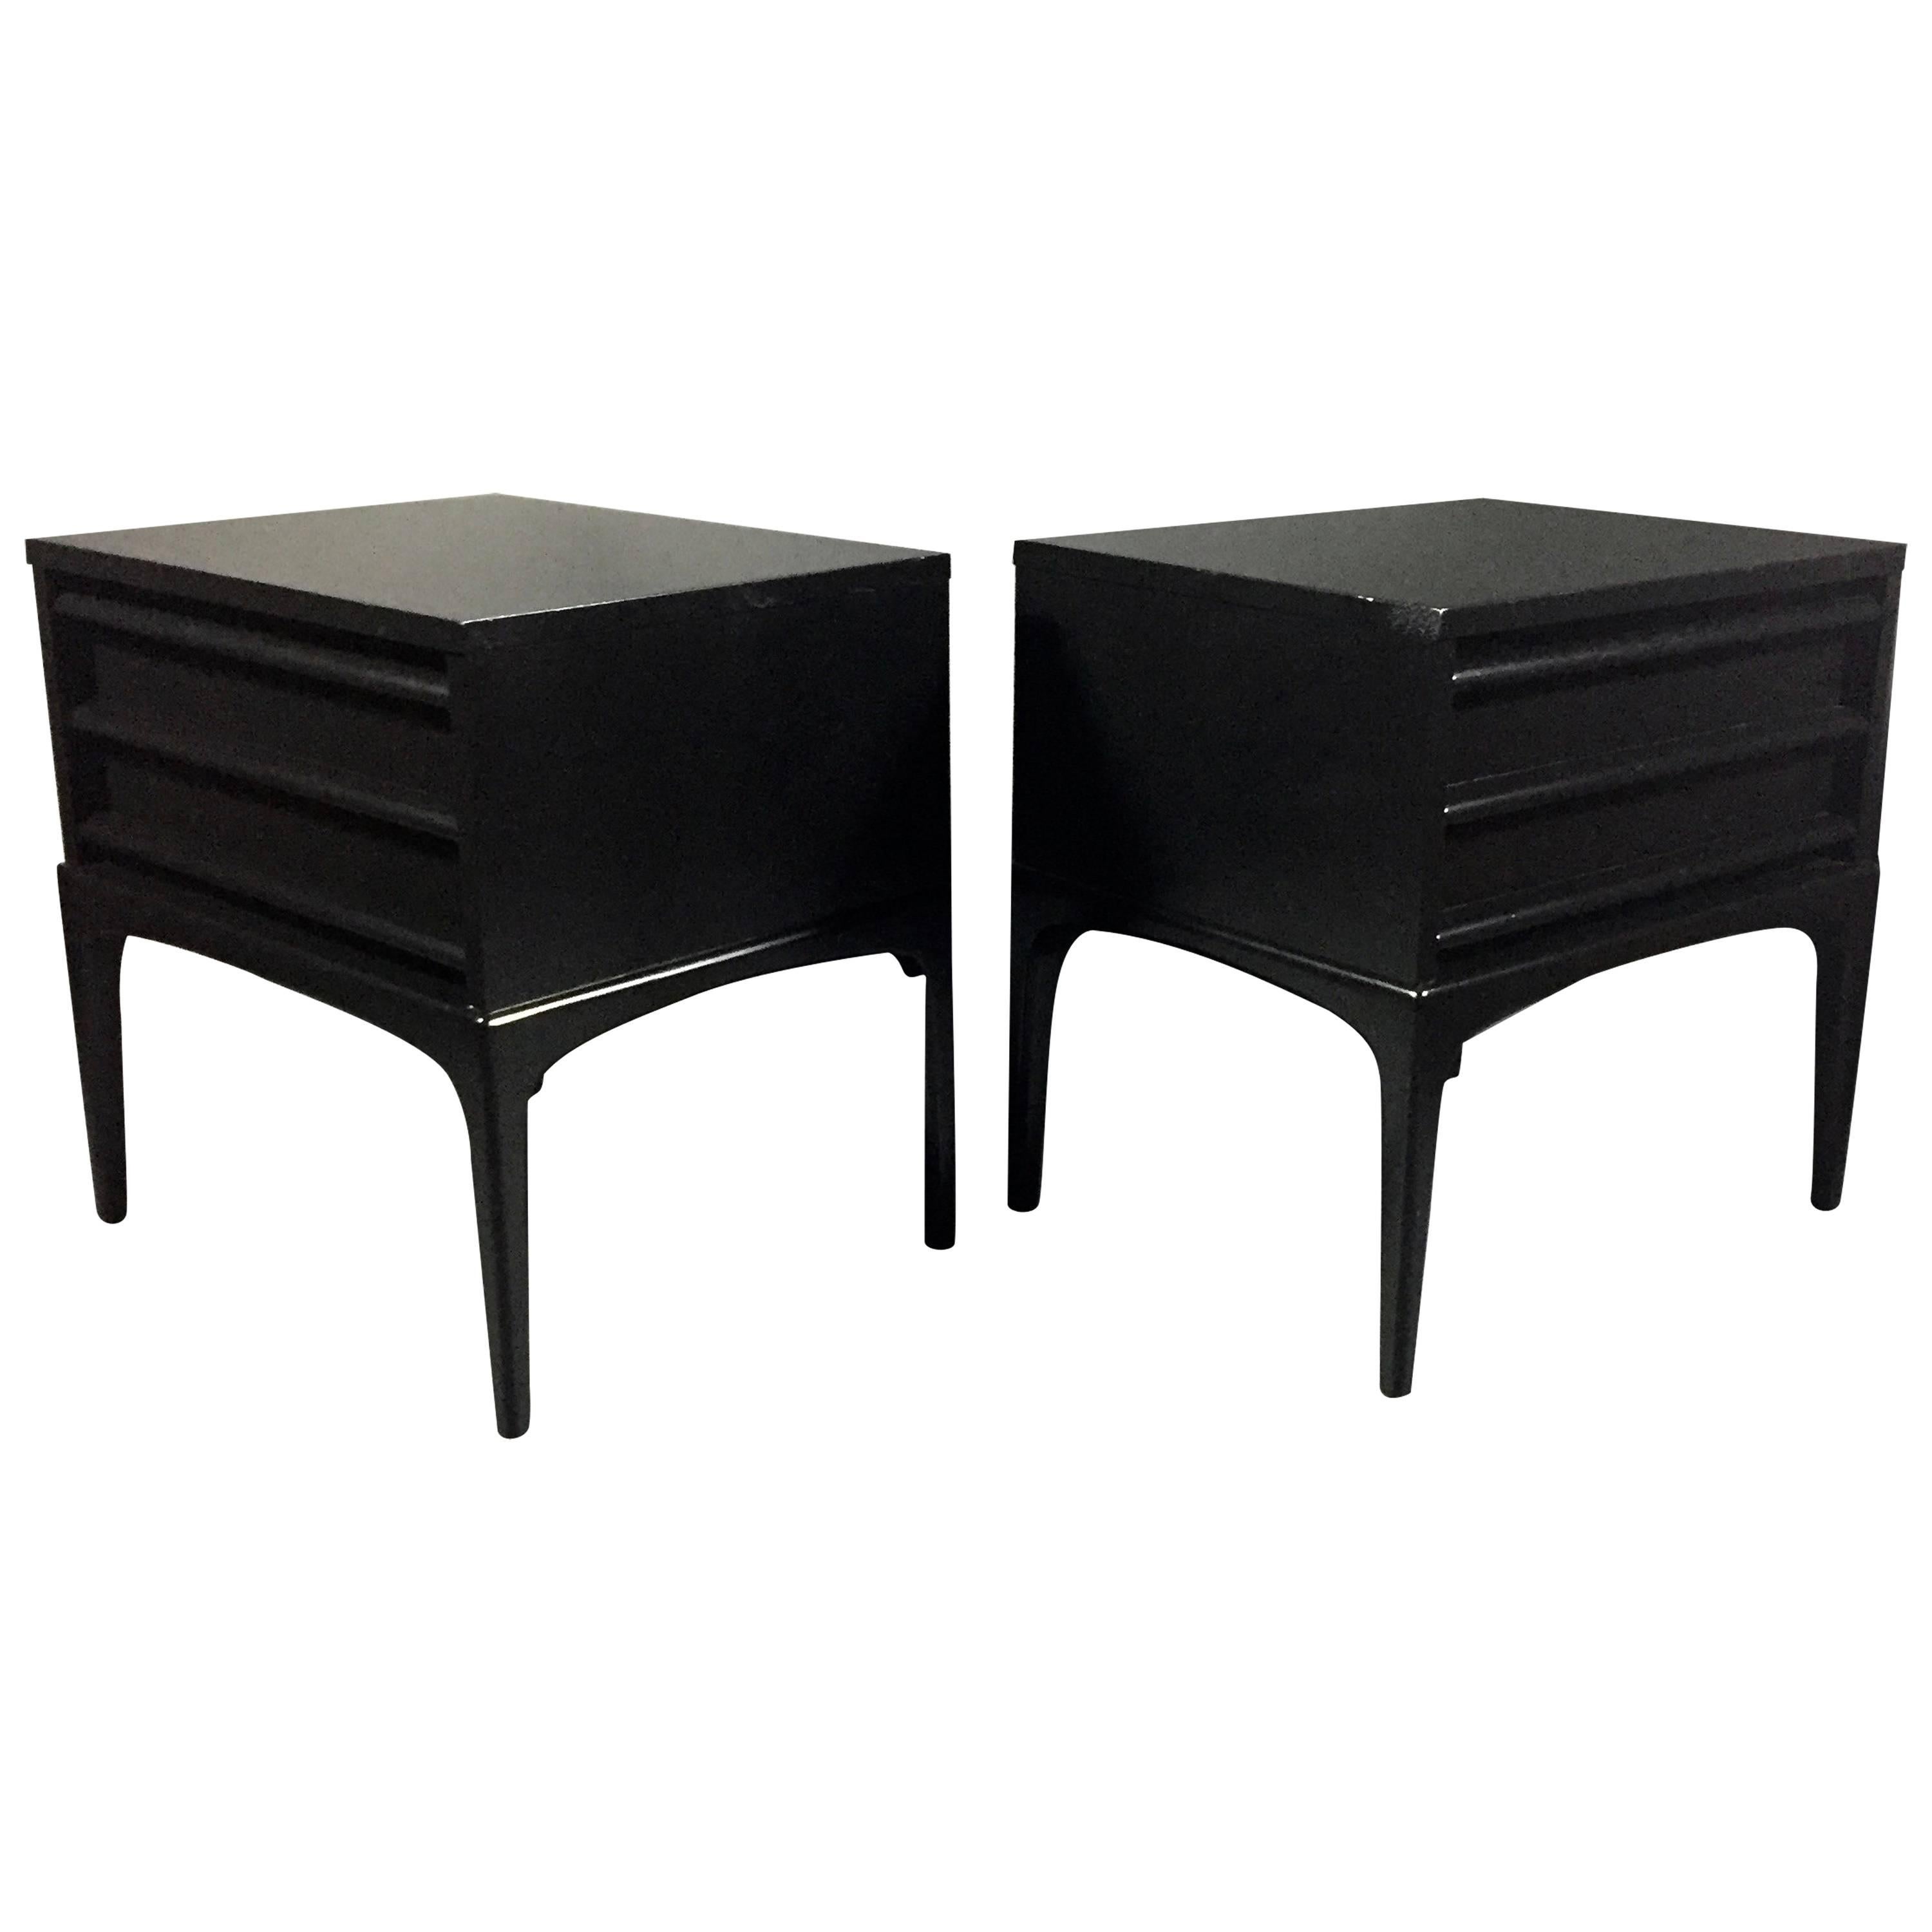 Pair of Midcentury Black Lacquered End Tables, USA, 1960s For Sale